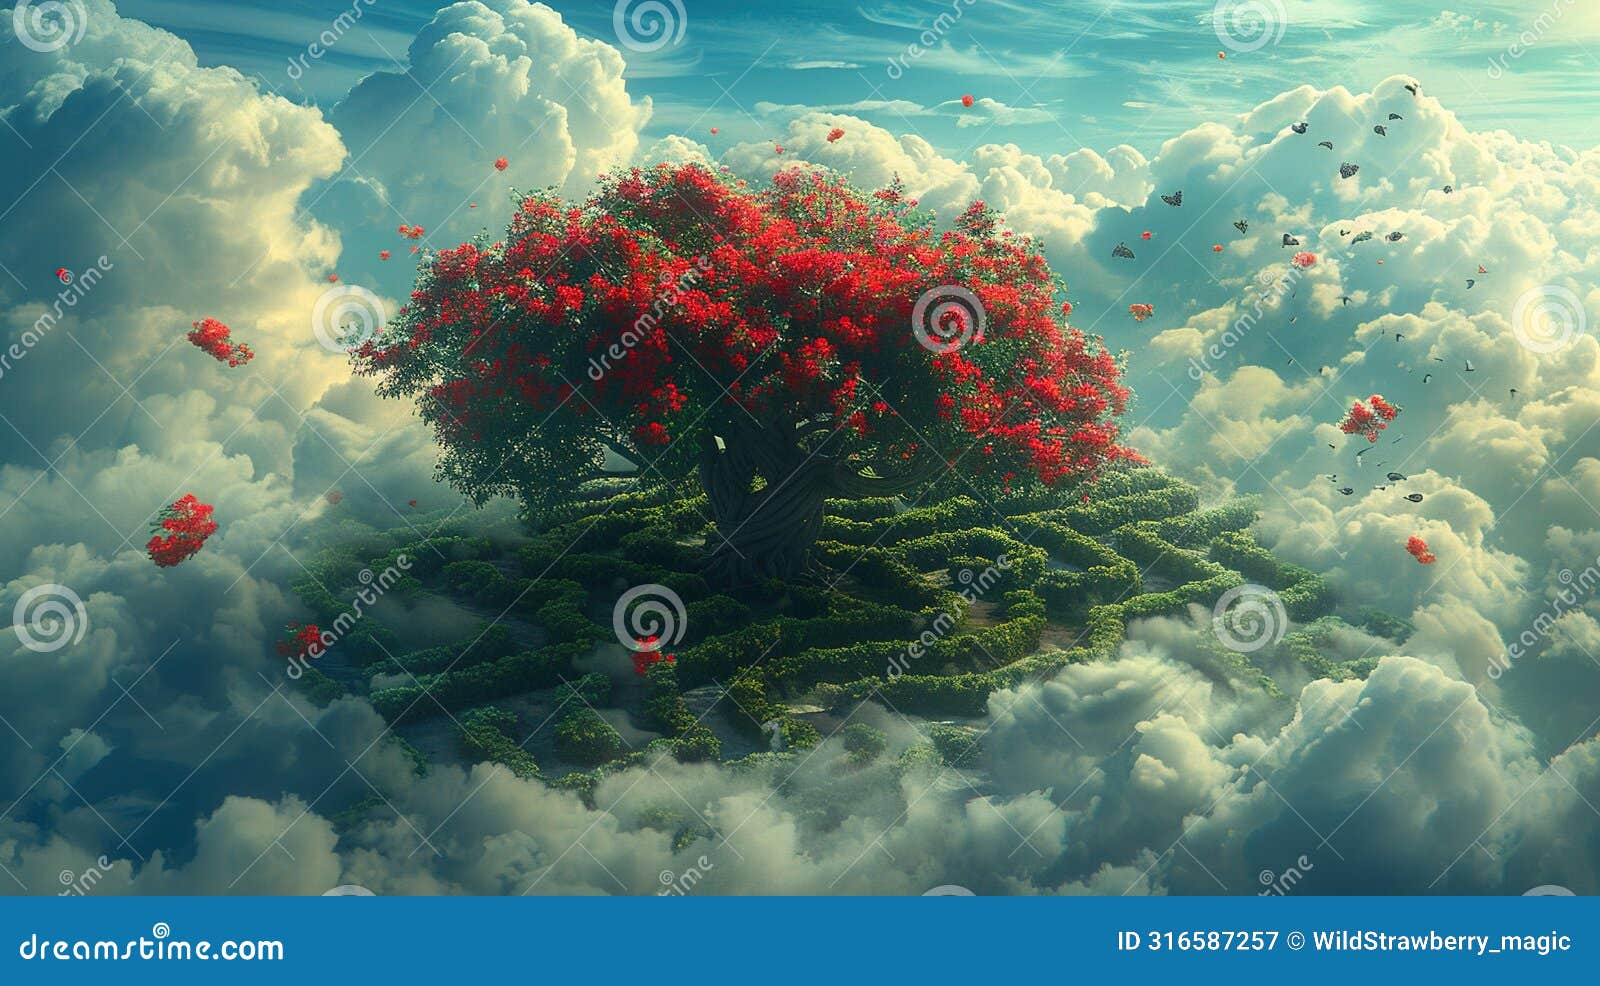 fantastical tree with red flowers amidst clouds and butterflies. generated ai